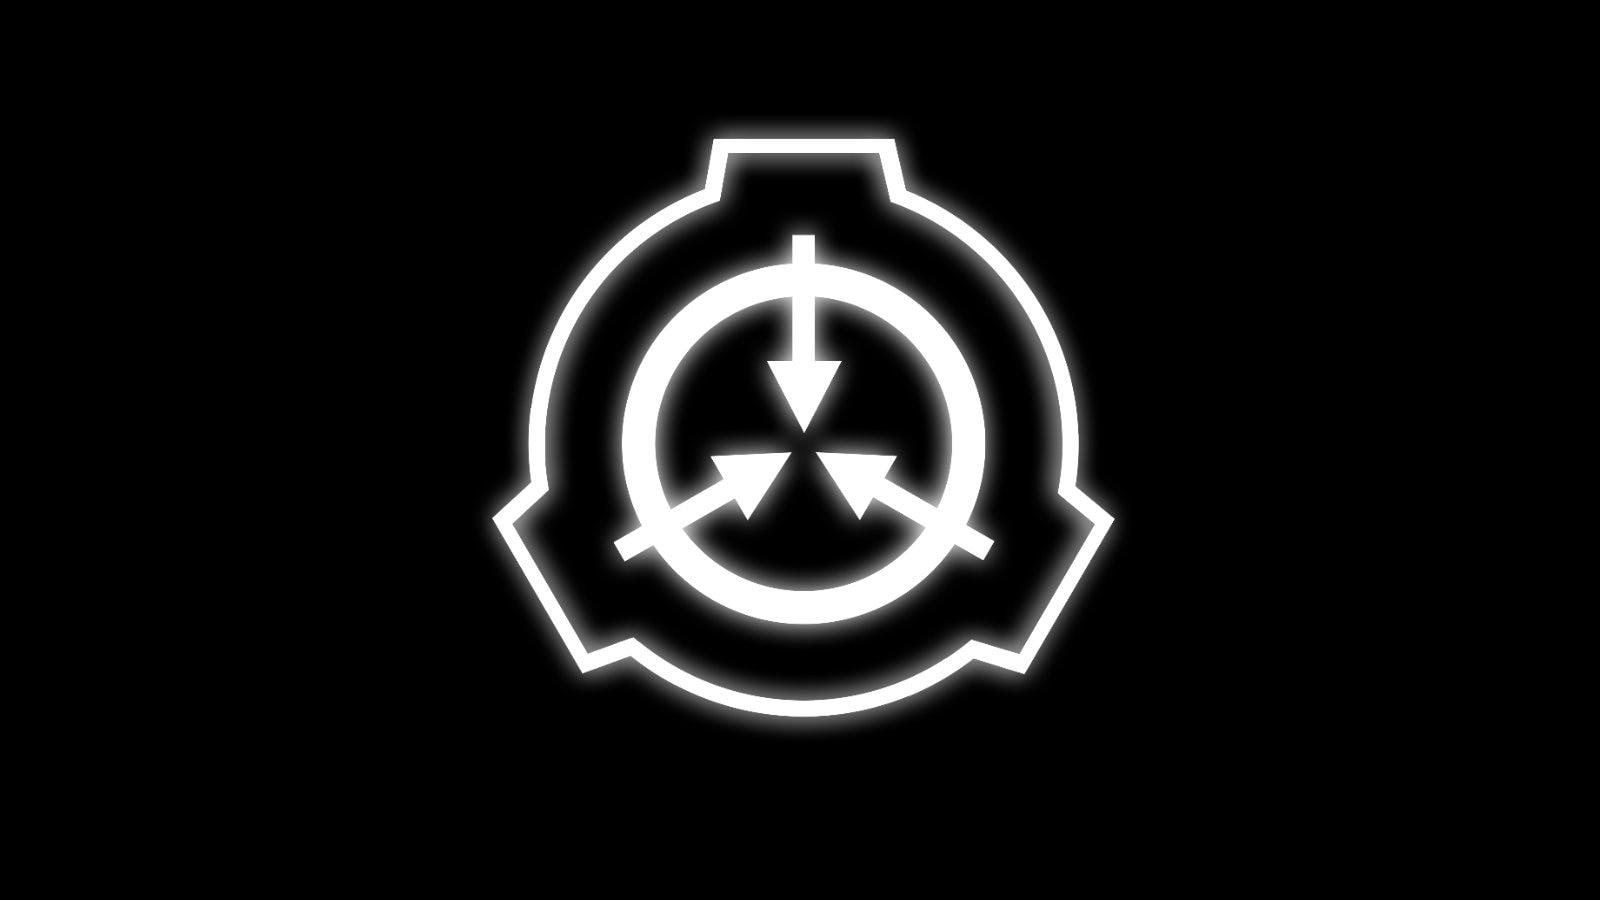 Encyclopedia Of The SCP Foundation - Extra SCP Object Classes